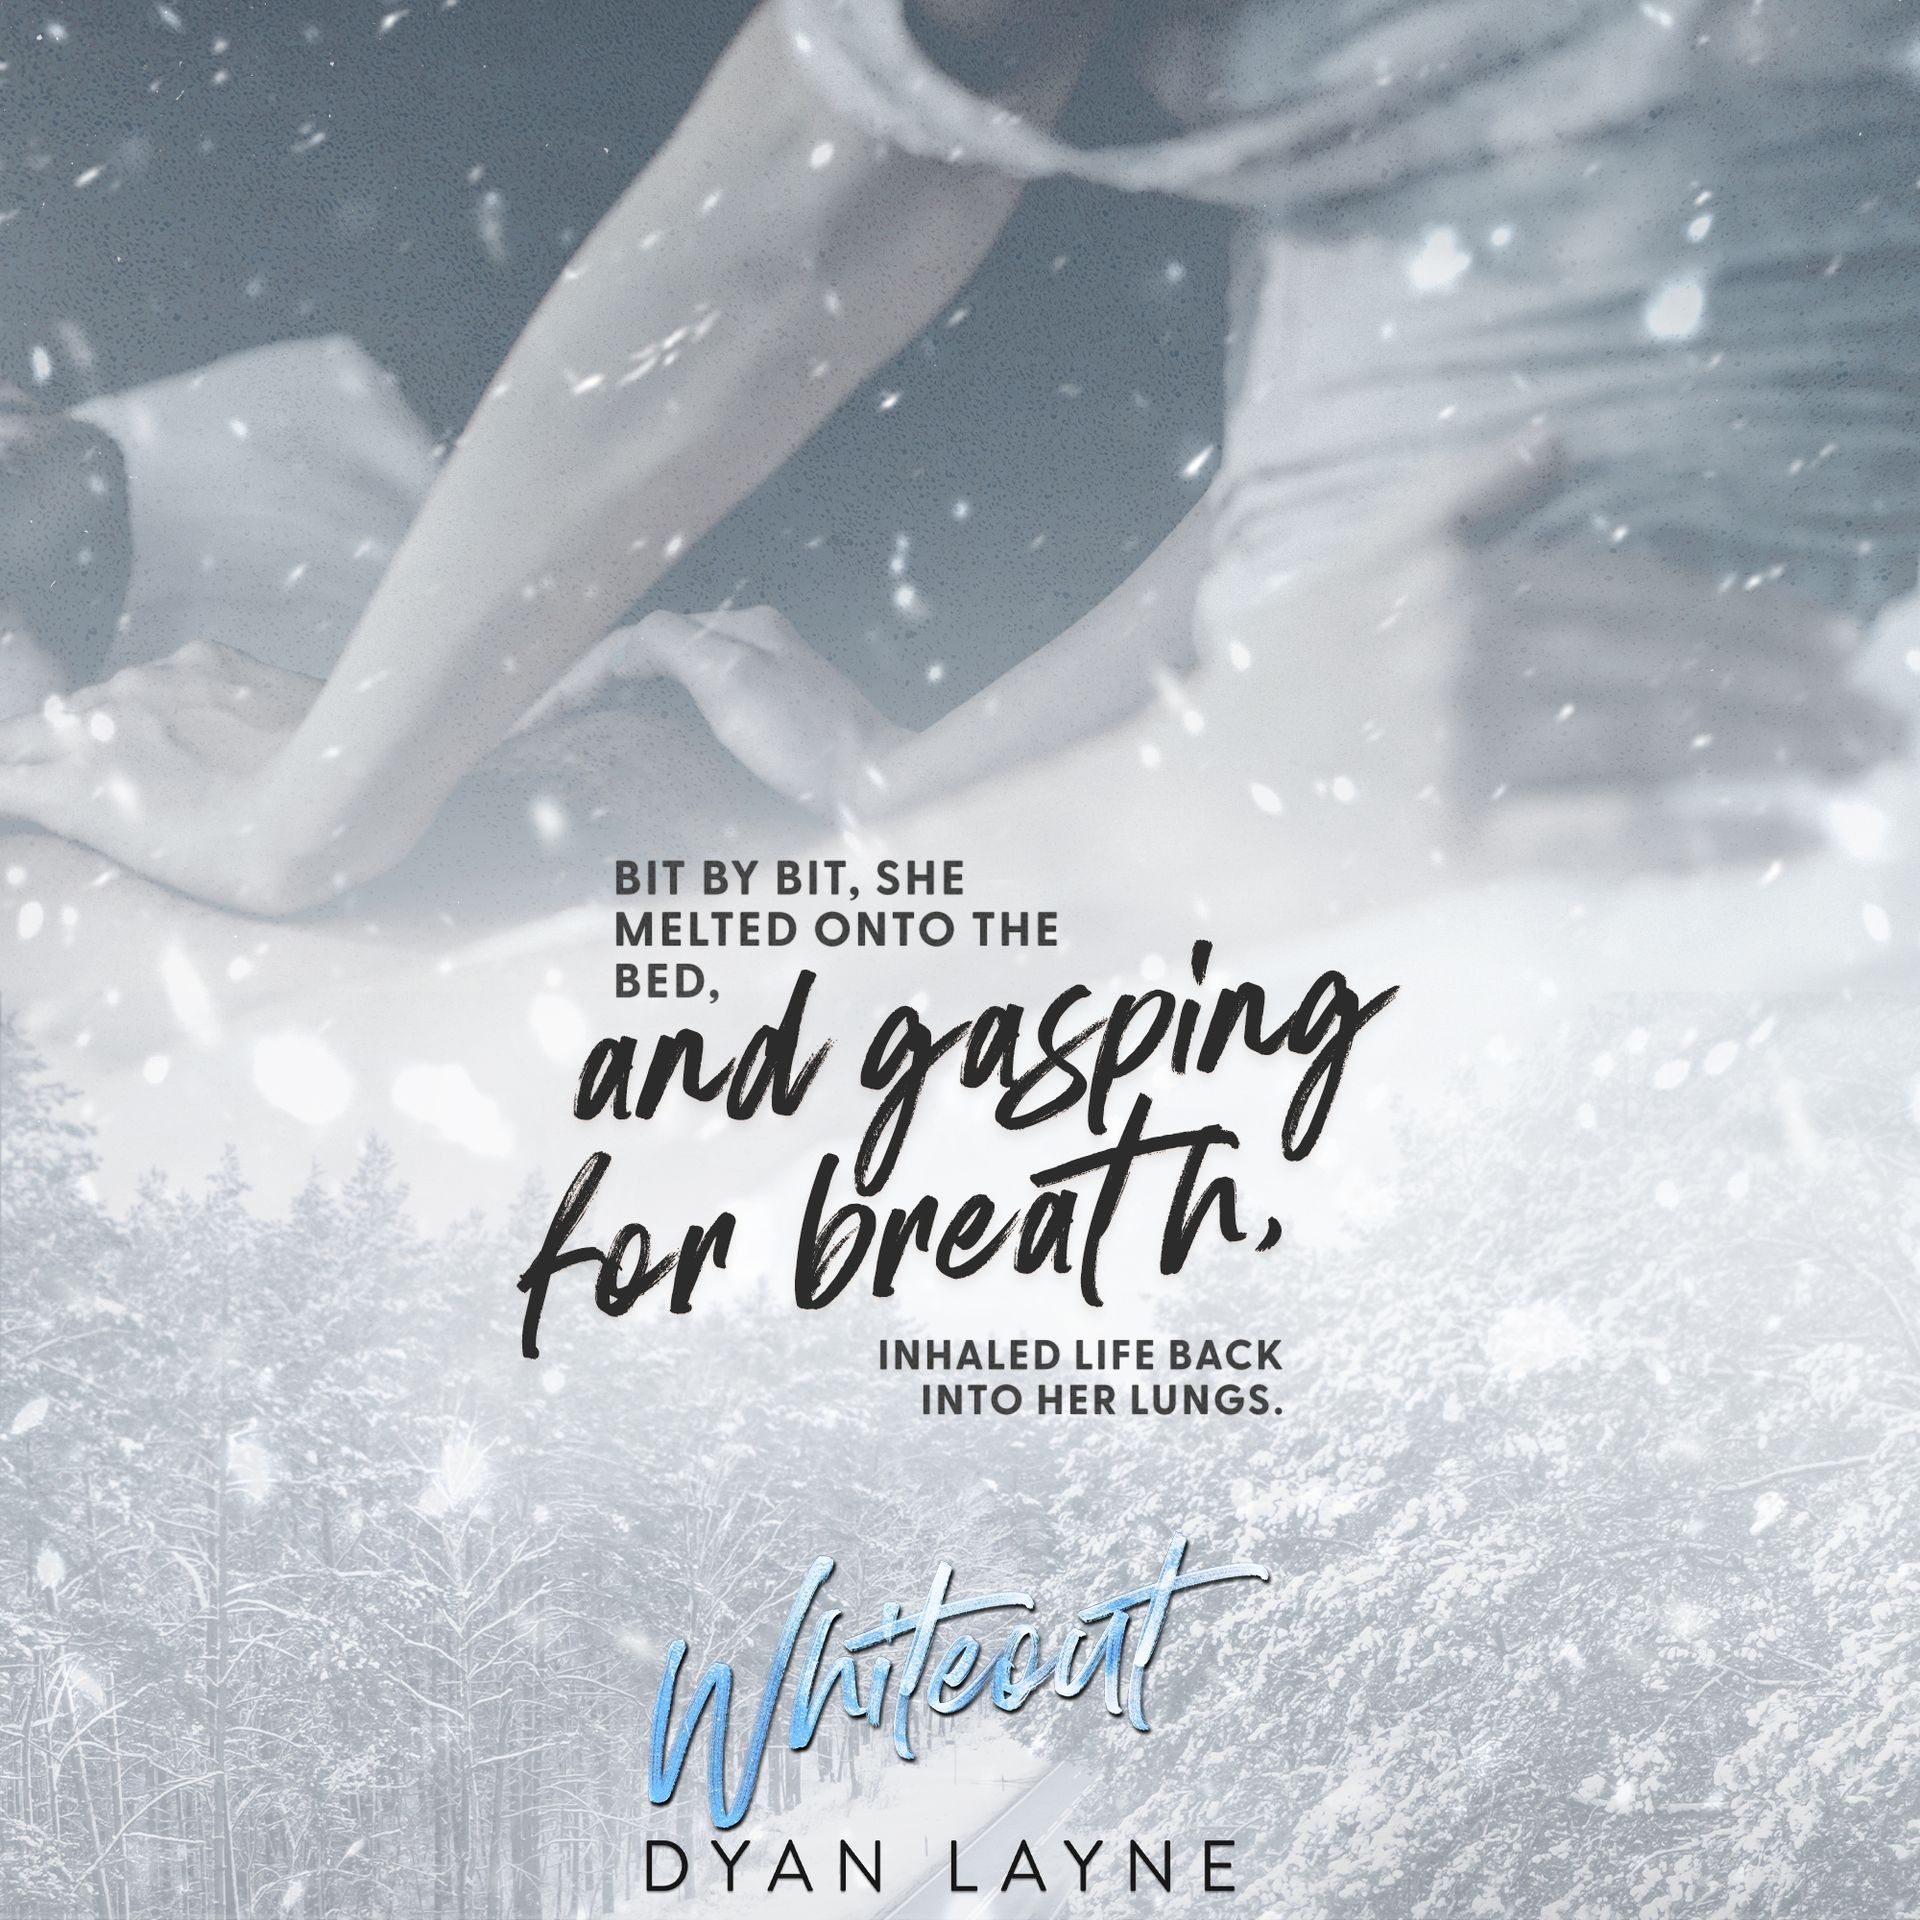 A graphic for whiteout by dyan layne that says bit by bit she melted onto the bed and gasping for breath.